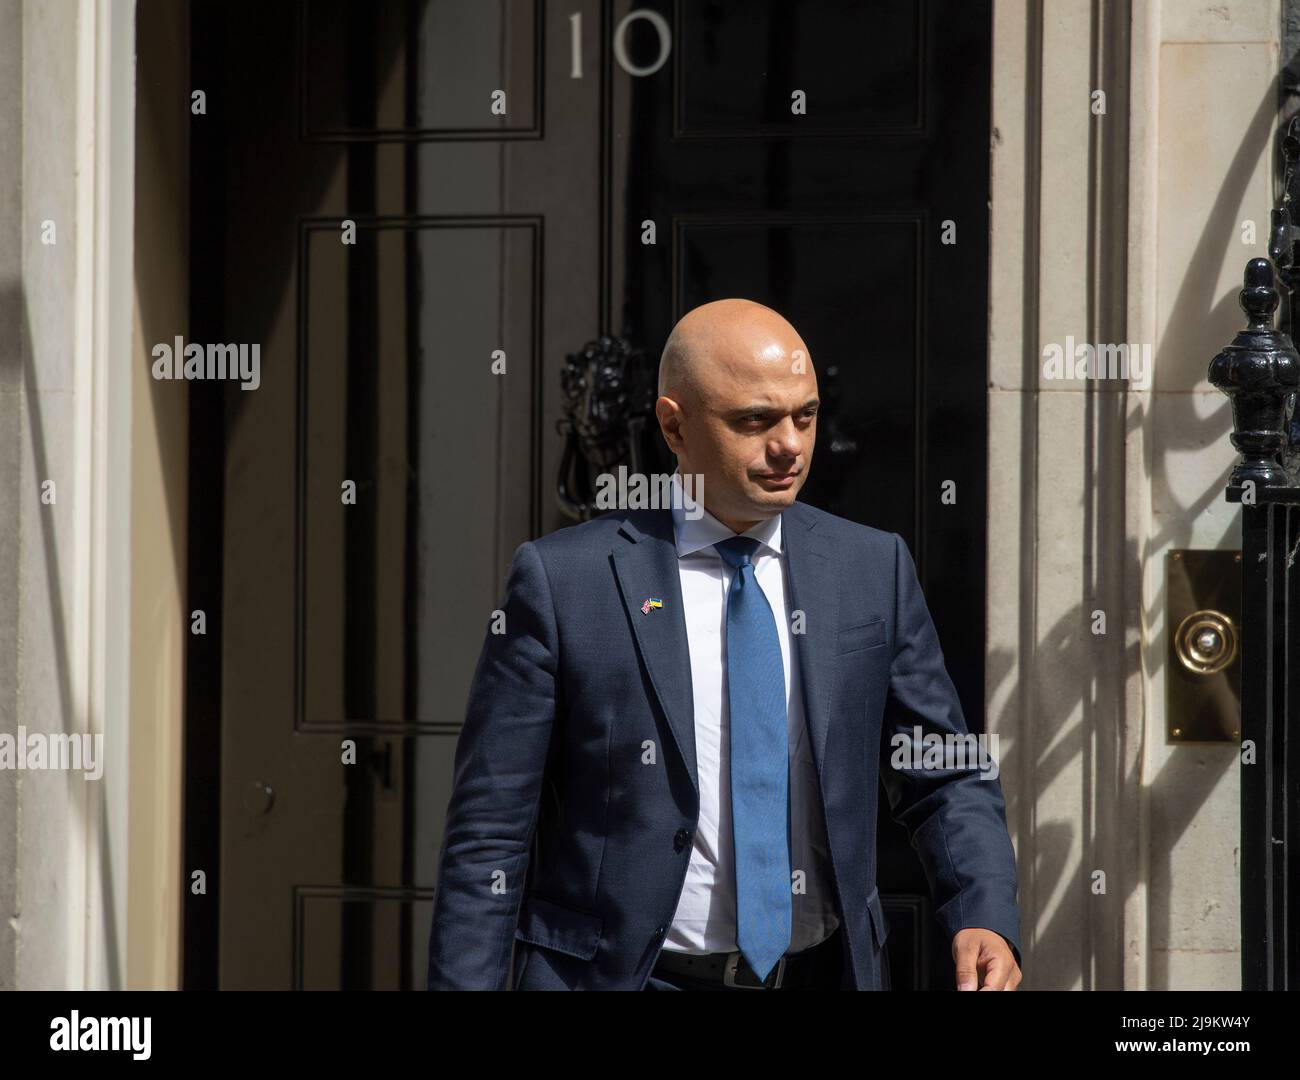 Downing Street, London, UK. 24 May 2022. Sajid Javid MP, Secretary of State for Health and Social Care in Downing Street for weekly cabinet meeting. Credit: Malcolm Park/Alamy Live News. Stock Photo